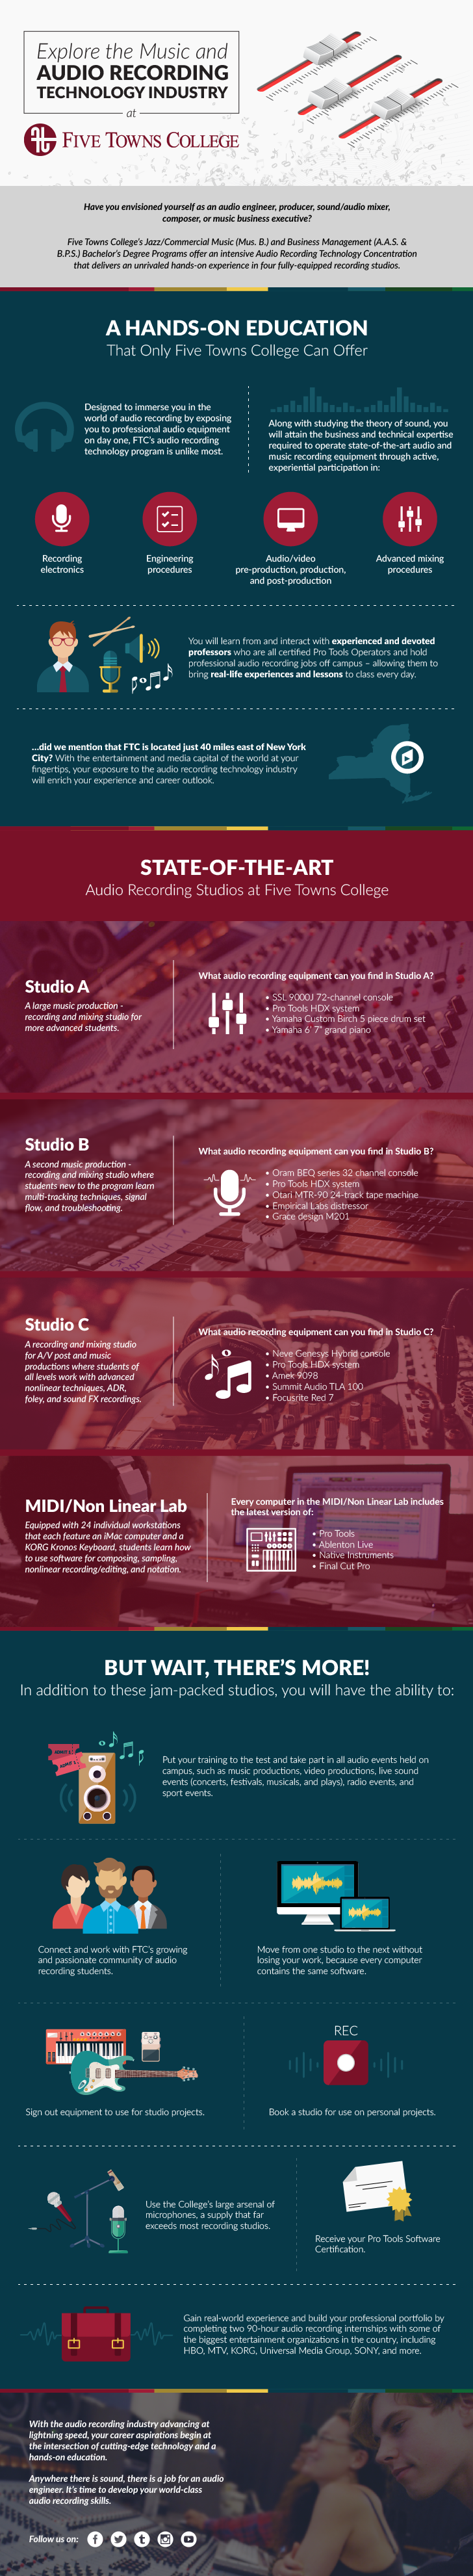 Explore the music and audio recording technology industry at Five Towns College